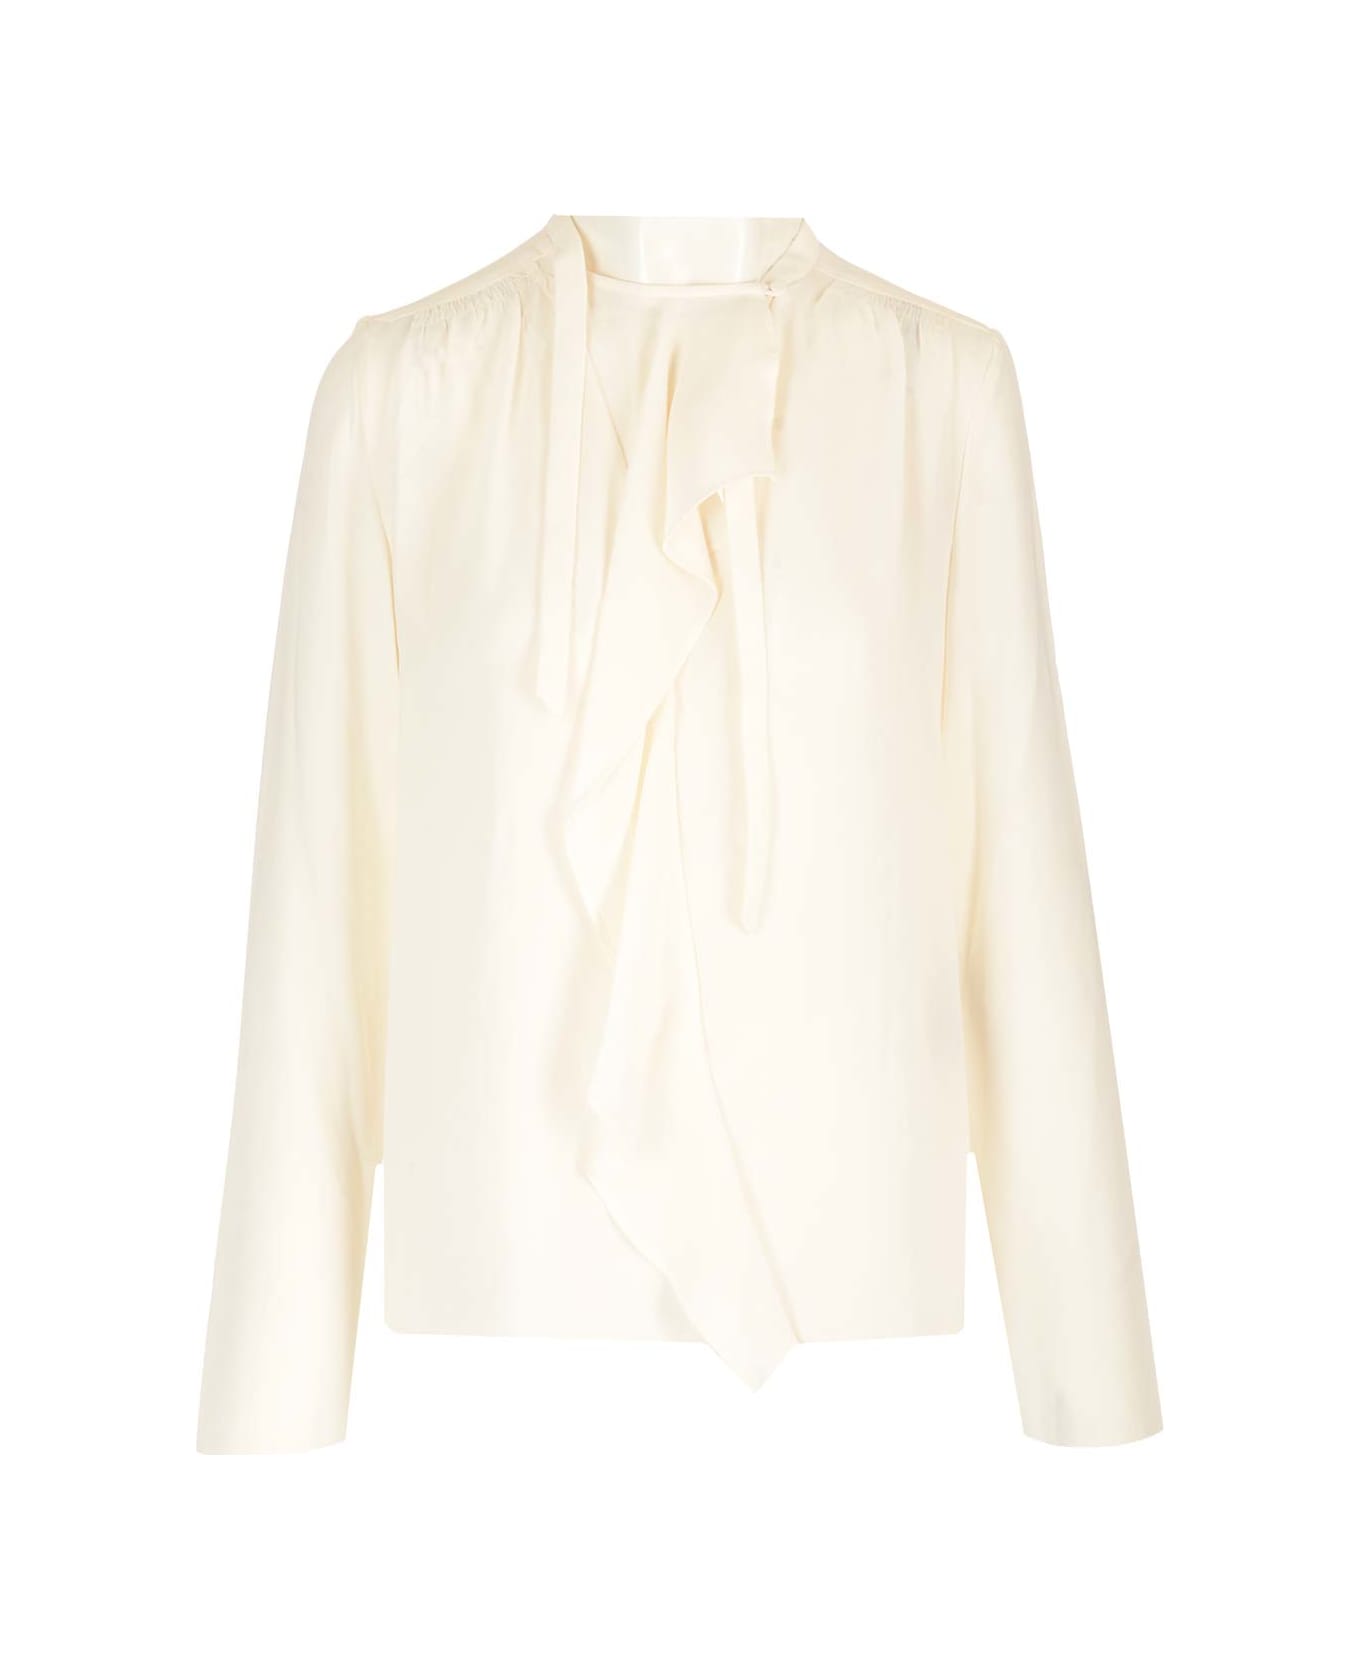 Isabel Marant Blouse With Ruffles - Ecru ブラウス